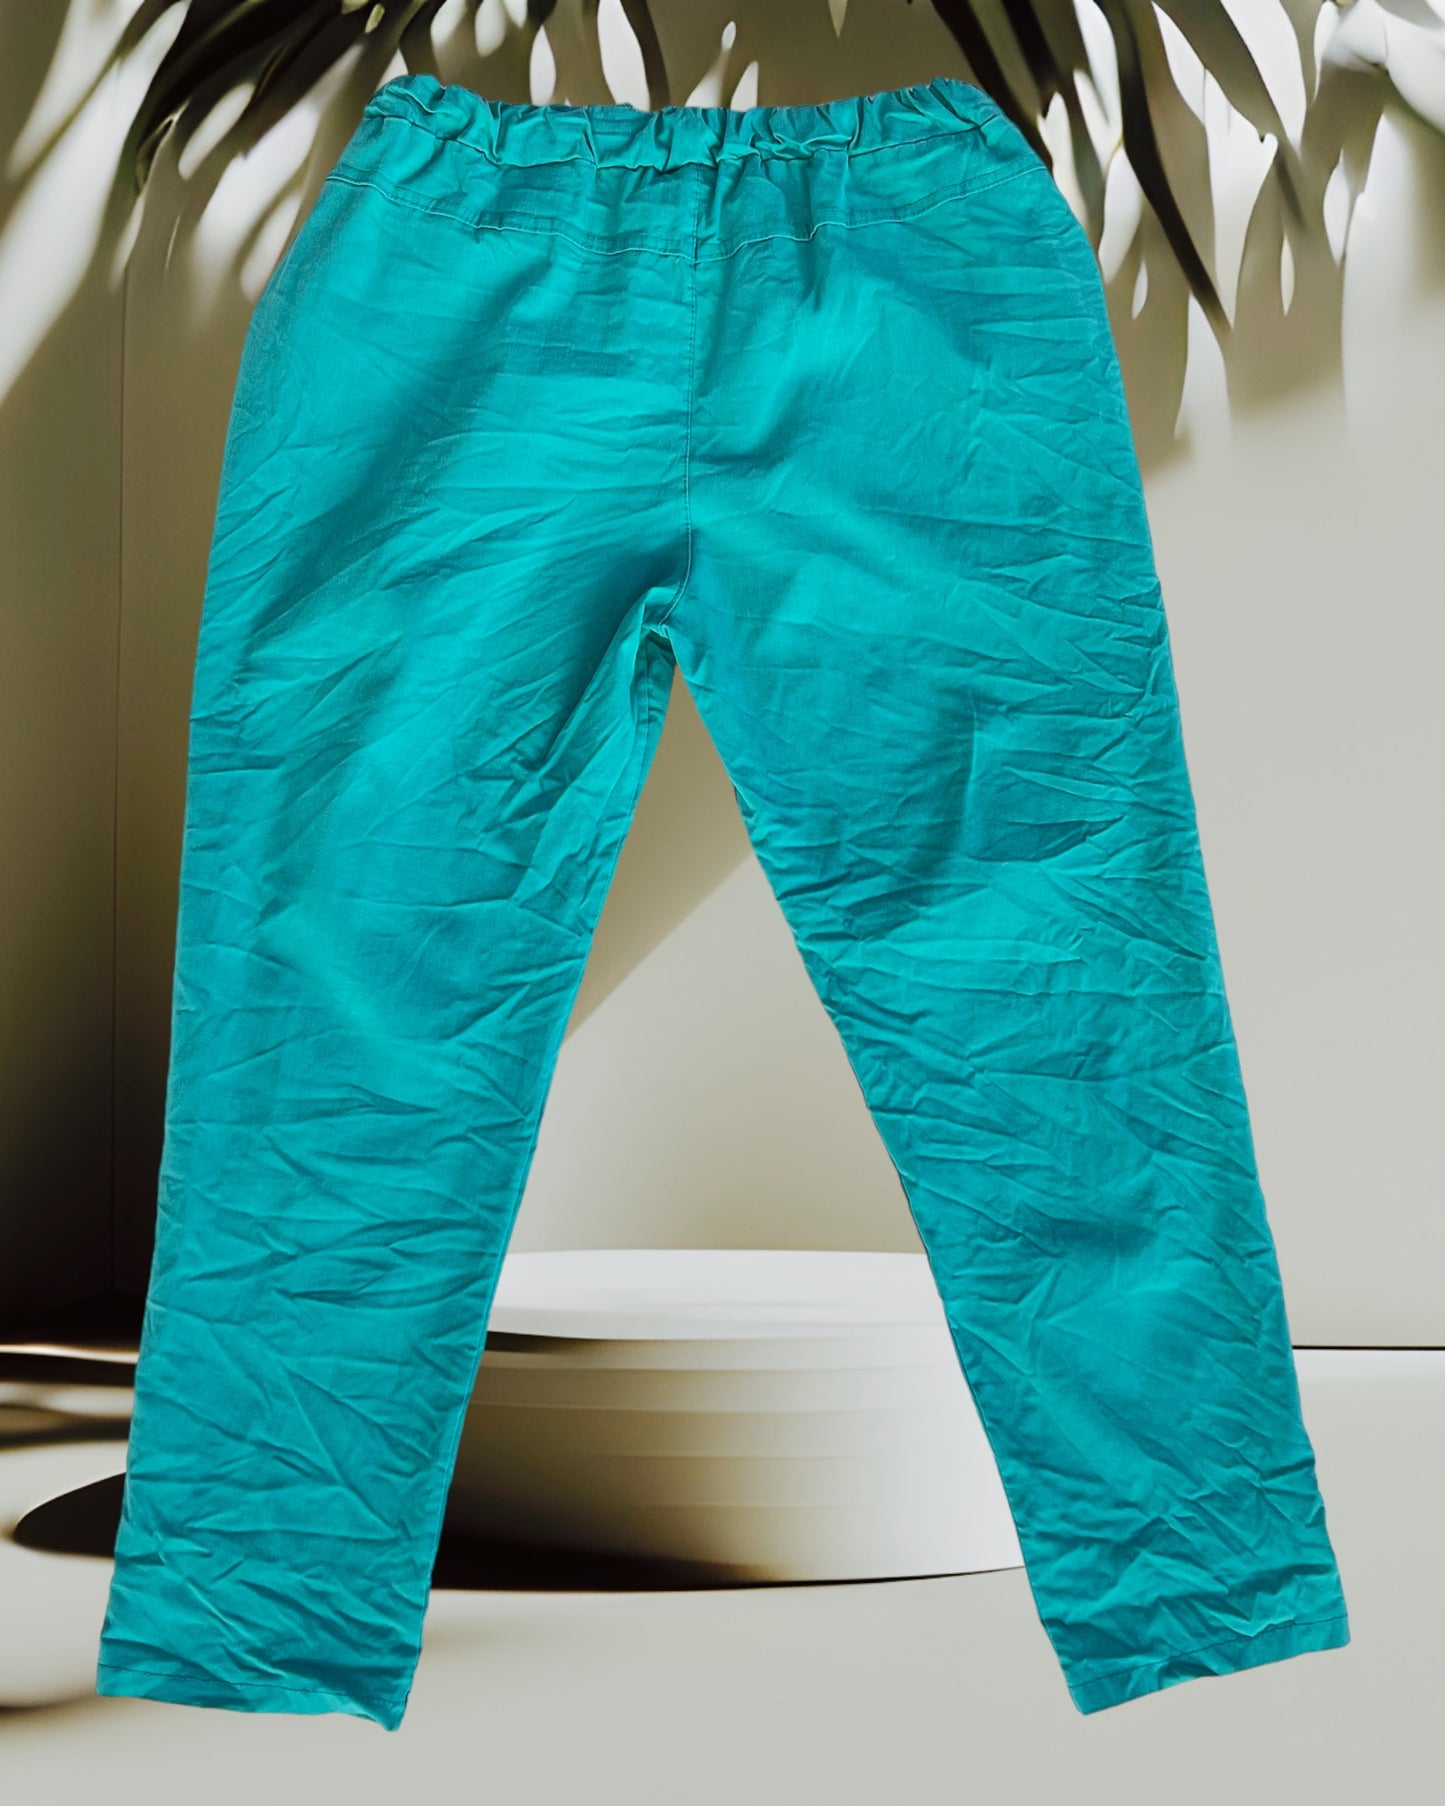 FRED - PANTALON SPORTSWEAR TURQUOISE TAILLE 46 A 52